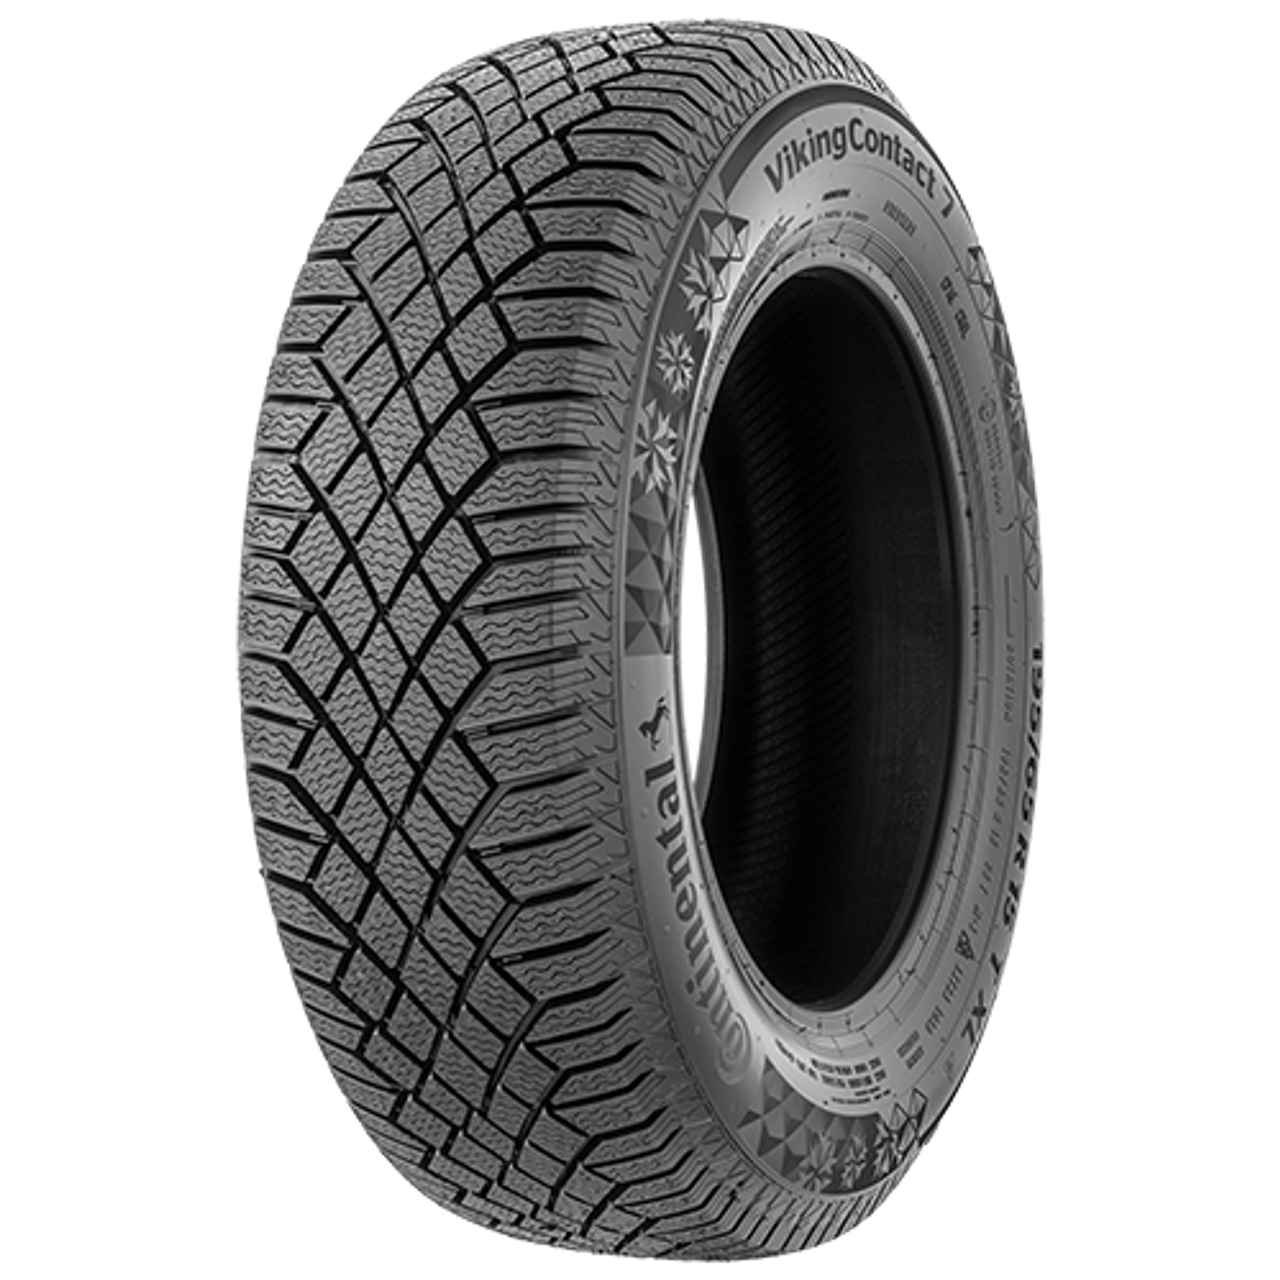 CONTINENTAL VIKINGCONTACT 7 215/60R17 100T NORDIC COMPOUND FR BSW XL